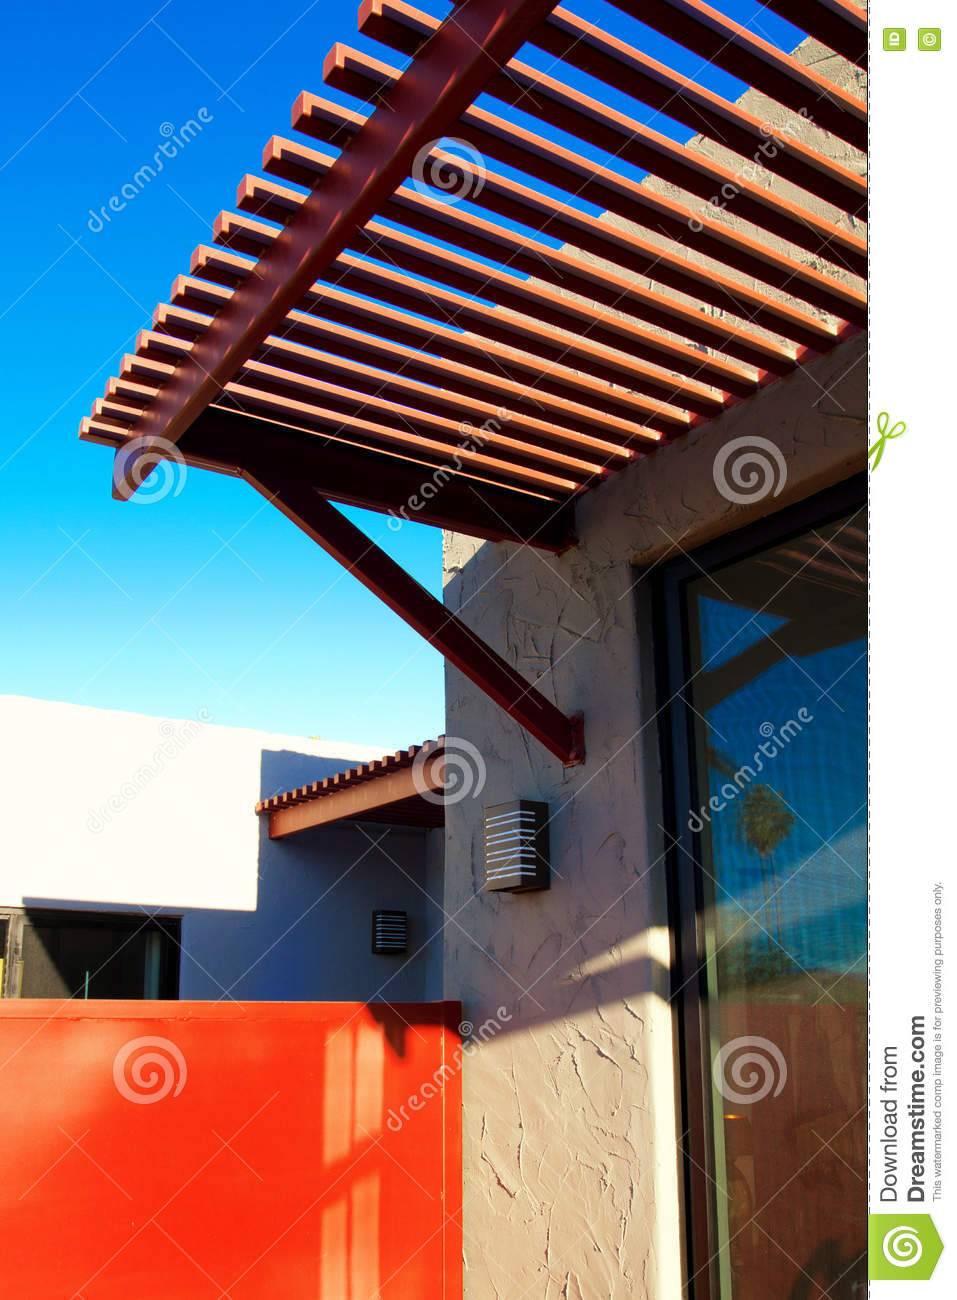 modern-metal-awning-over-storefront-partially-shades-visitors-building-blisterin.jpg